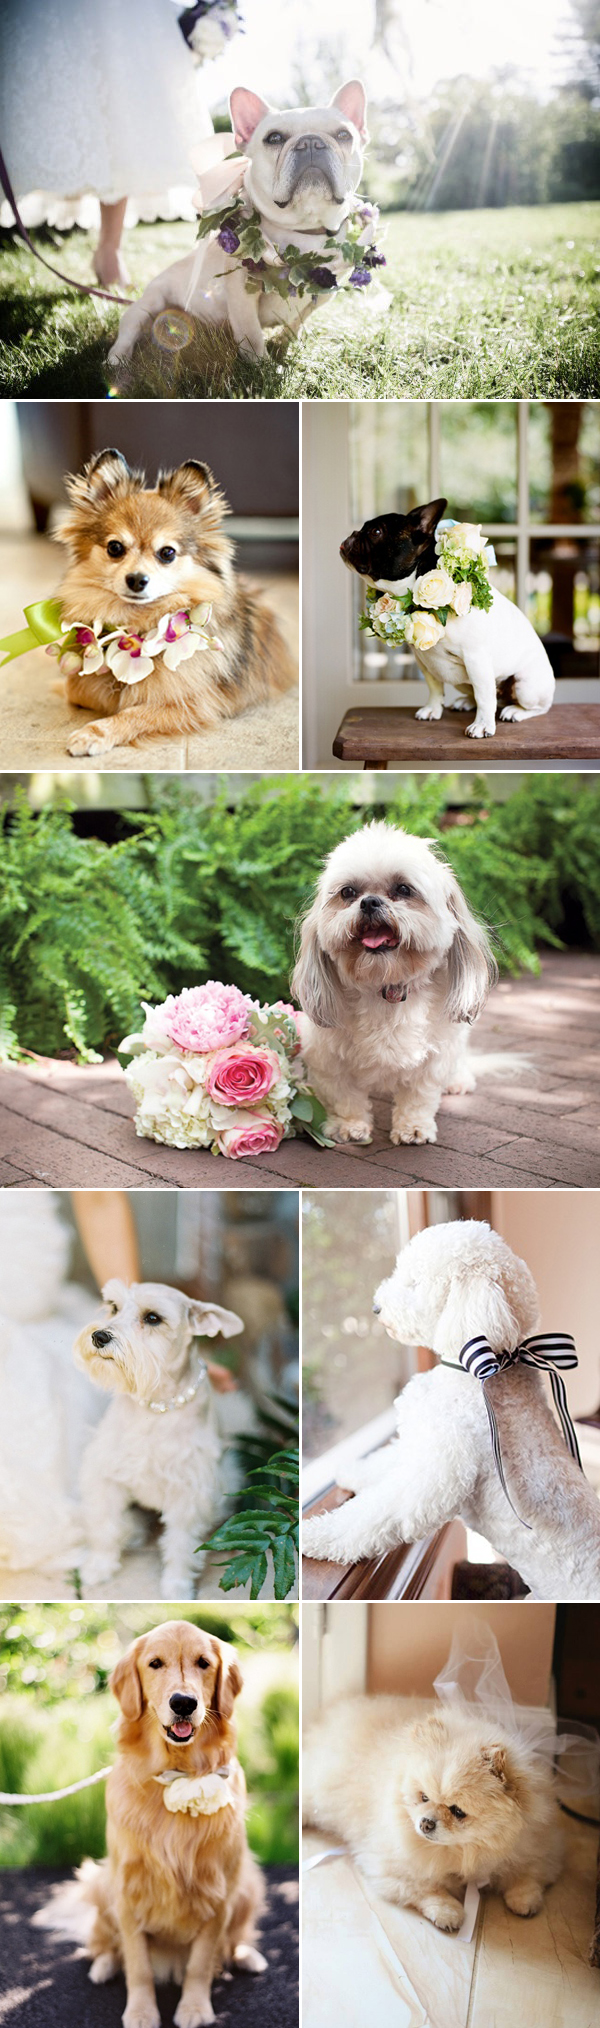 unique wedding ideas - dogs in weddings with flowers